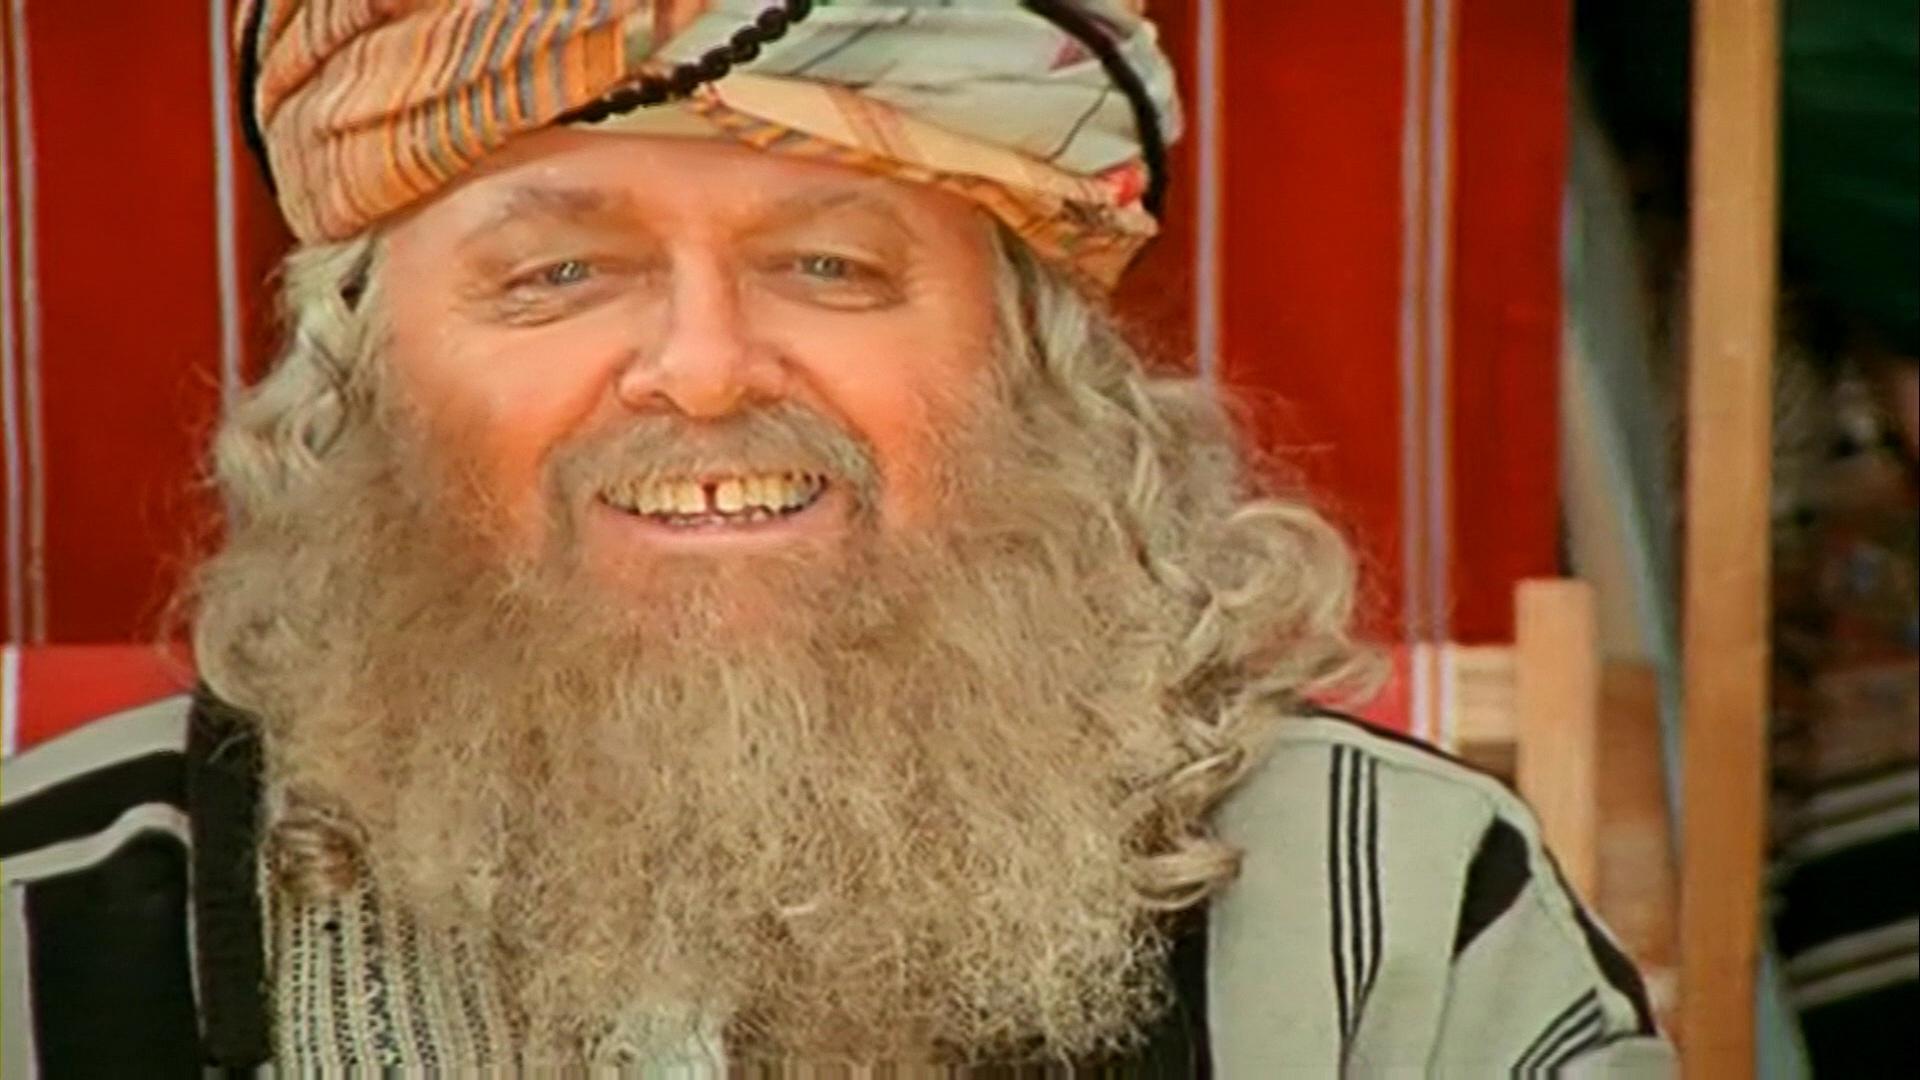 Photograph from Joseph and the Amazing Technicolor Dreamcoat (1999) (2). Richard Attenborough